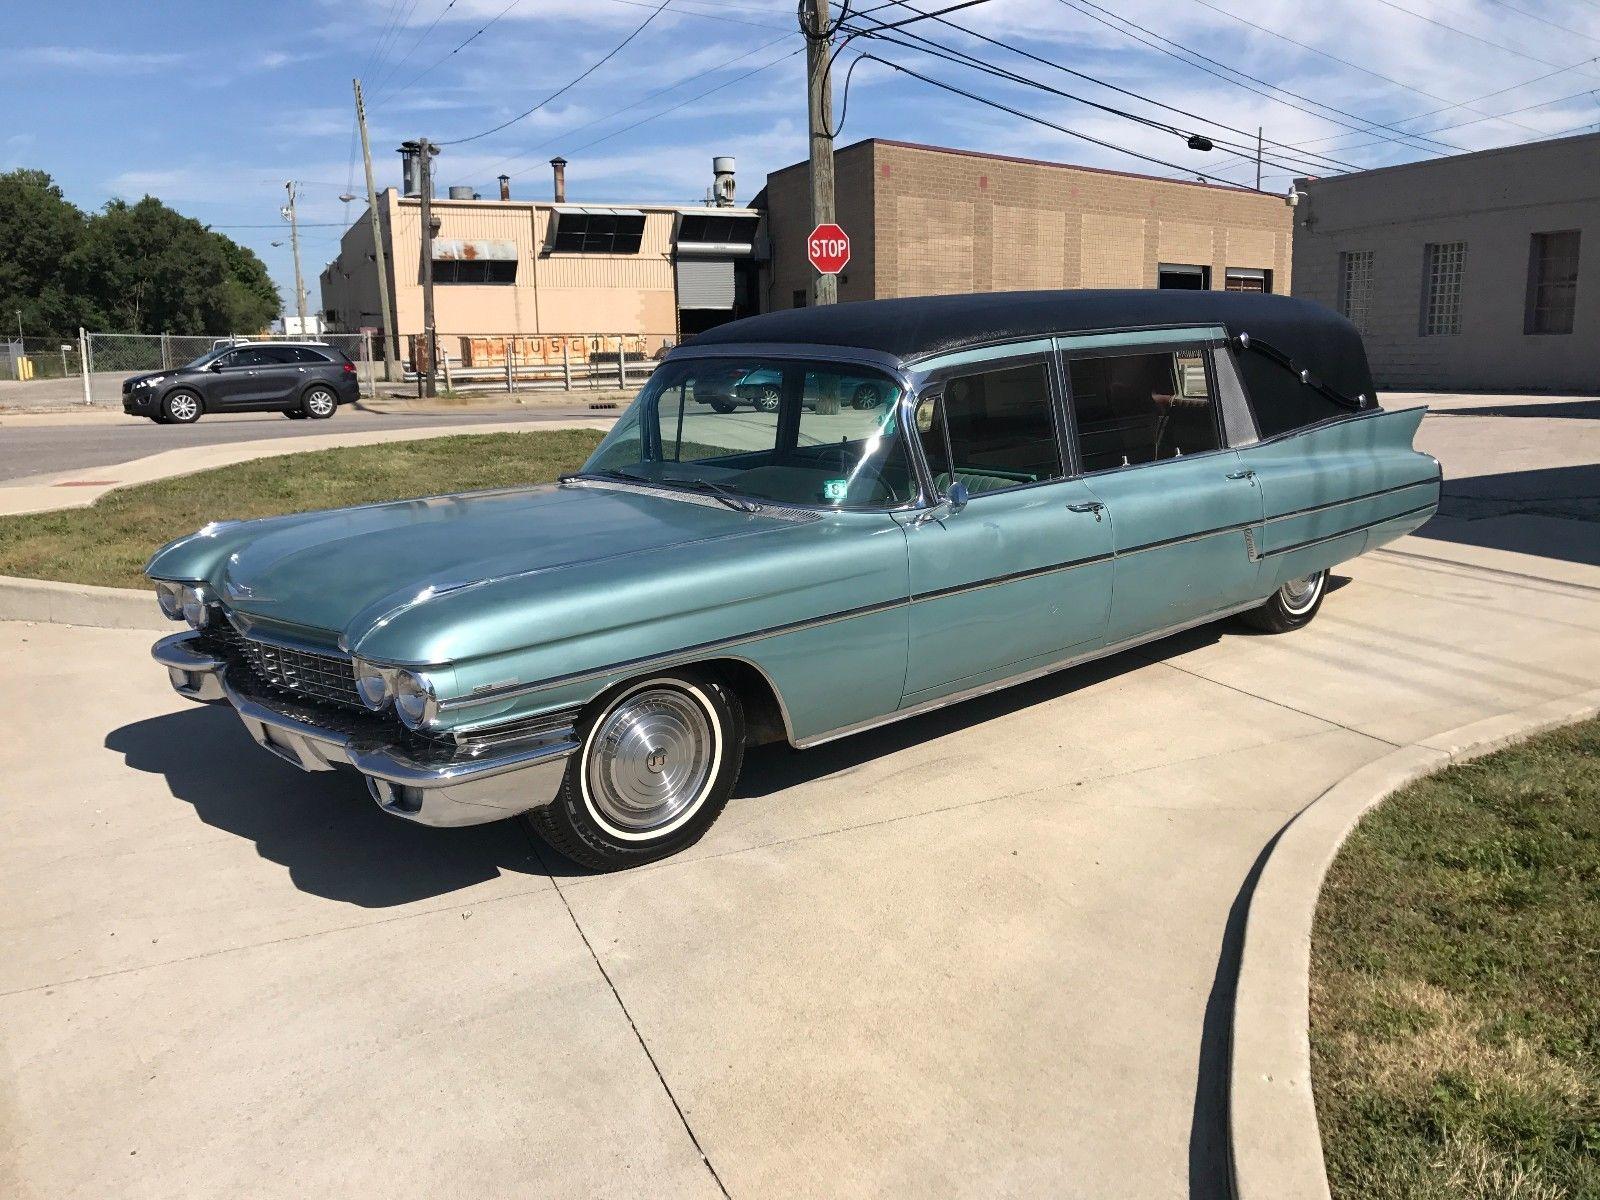 1960 Cadillac Eureka Hearse well serviced for sale. 